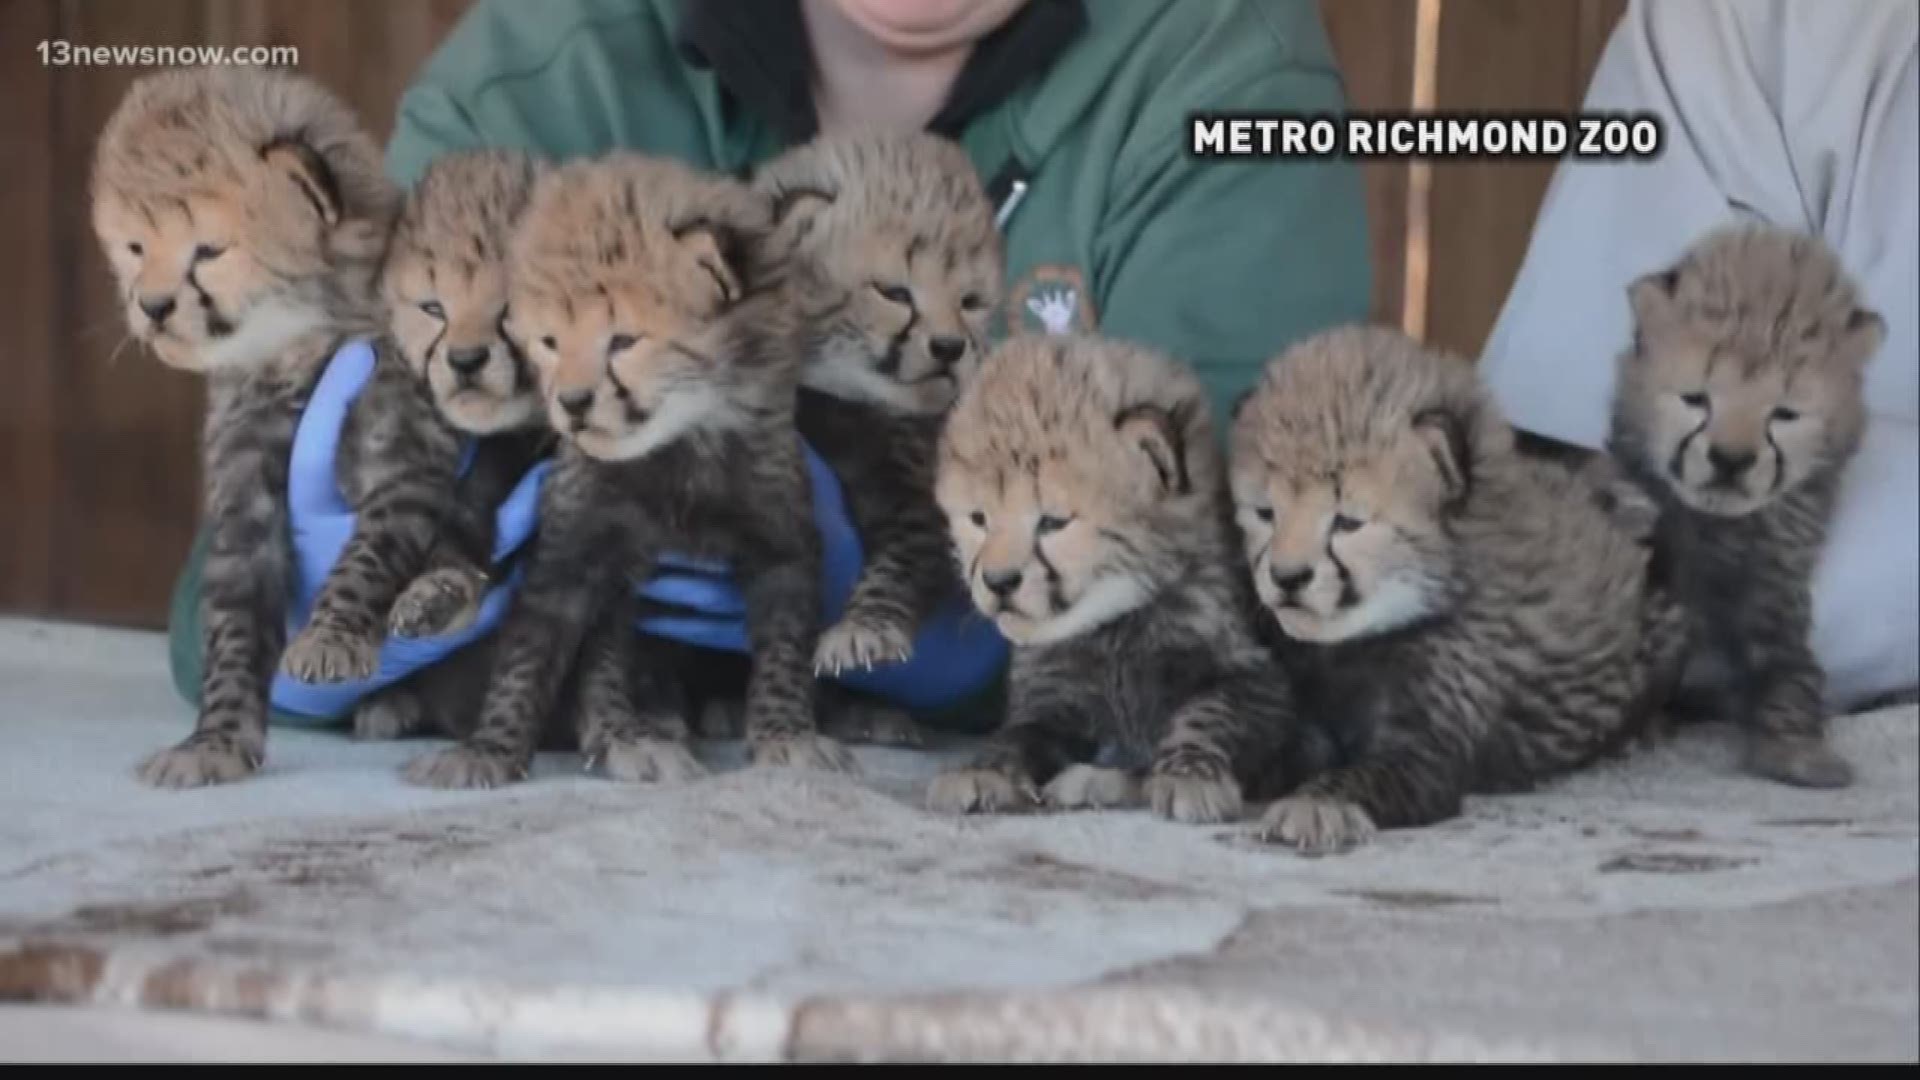 Seven cubs were born at the Richmond Zoo. This is a very rare birth that only happens one percent of the time.